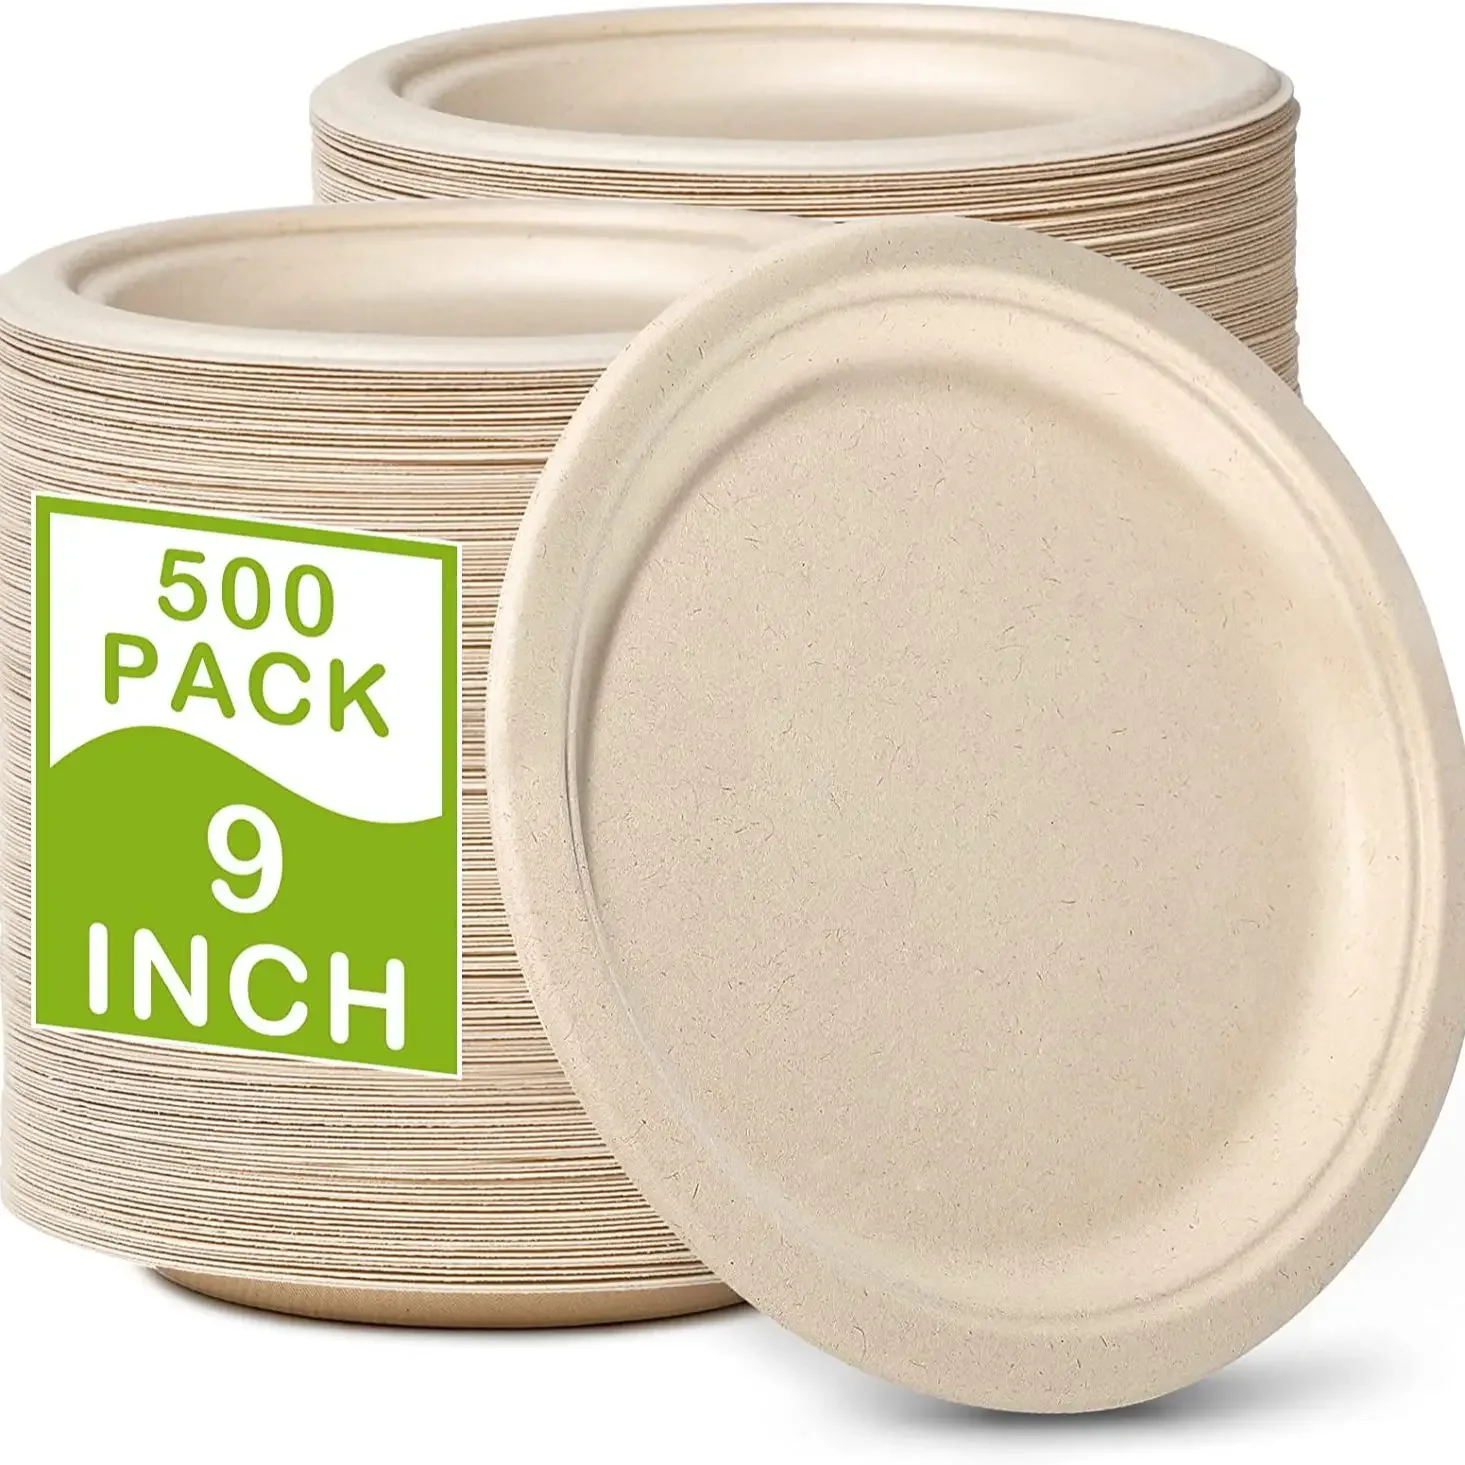 https://ae01.alicdn.com/kf/Sb6dc0850159d4c49a734b8bbf29fb1edP/disposable-party-pl-9-Inch-Paper-Plates-50-Pack-Disposable-Party-Plates-I-Heavy-Duty-Eco.jpg